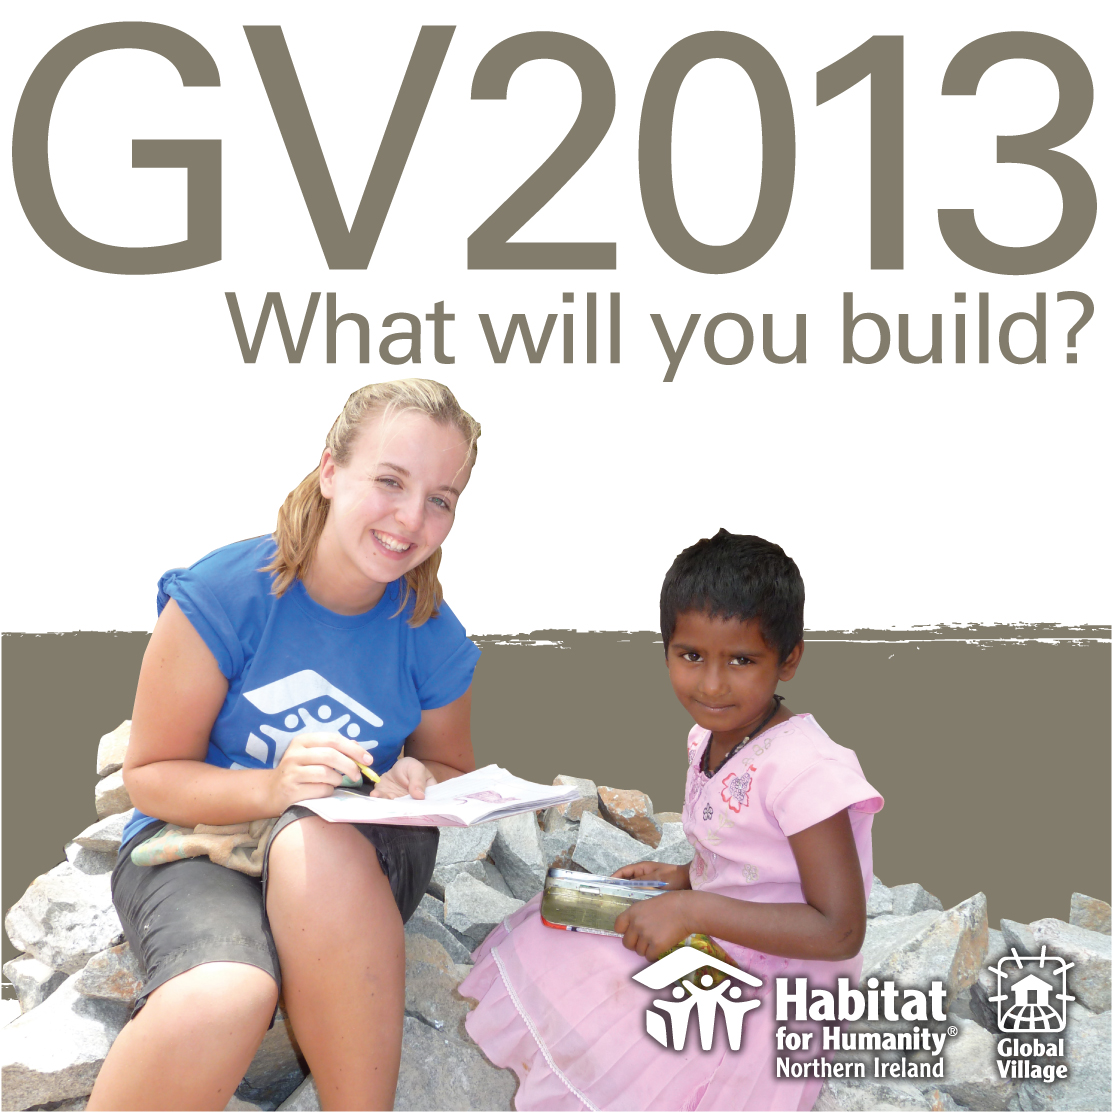 A photo of a Habitat volunteer with a Habitat beneficiary, with text promoting 'GV 2013: what will you build?'